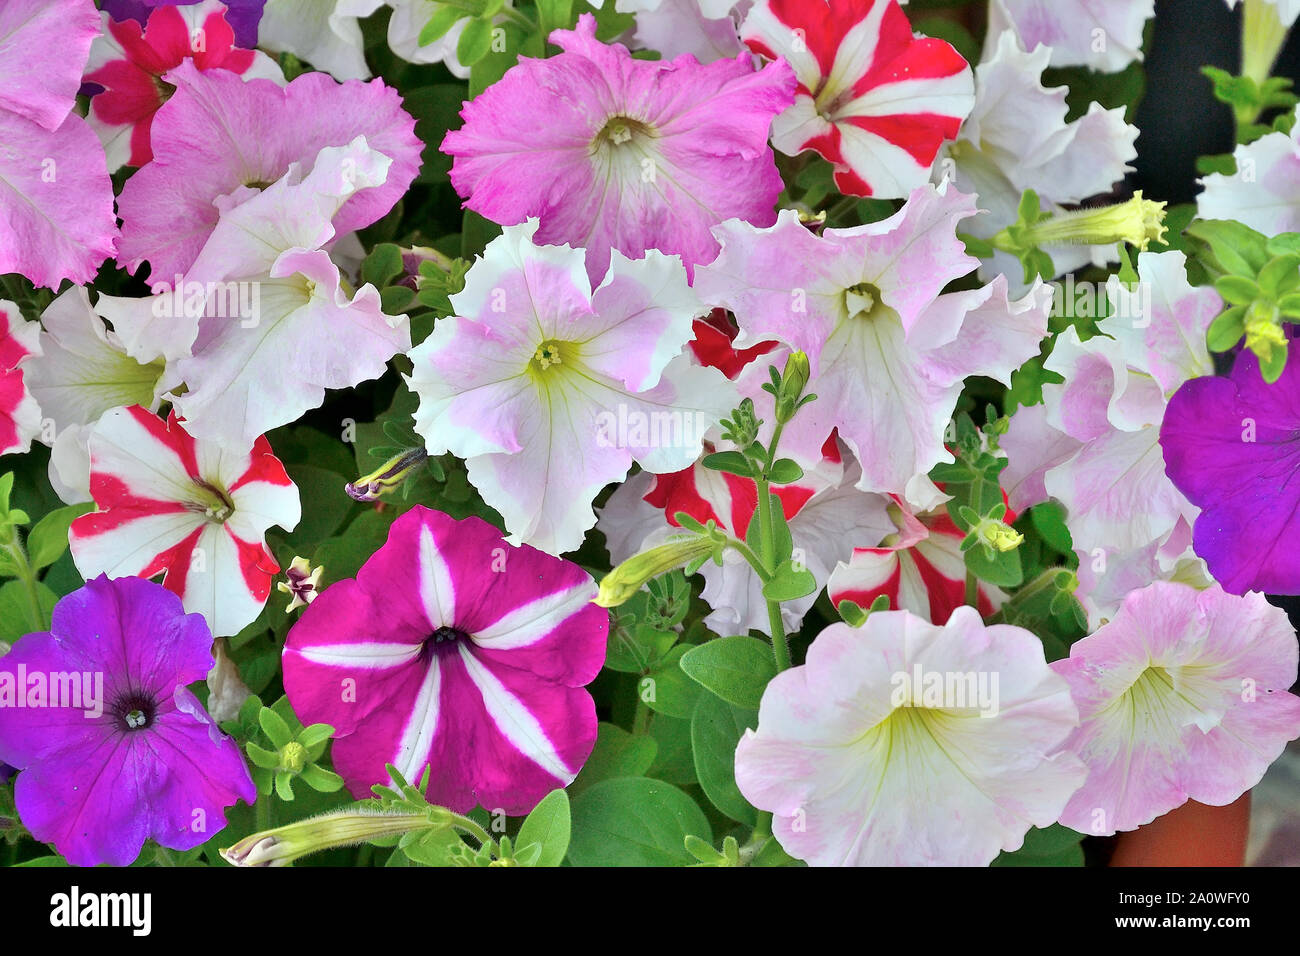 Gentle multicolored petunia floral background. Petunia - plant of  nightshade family with brightly colored funnel-shaped flowers. Ornamental hybrid Stock Photo